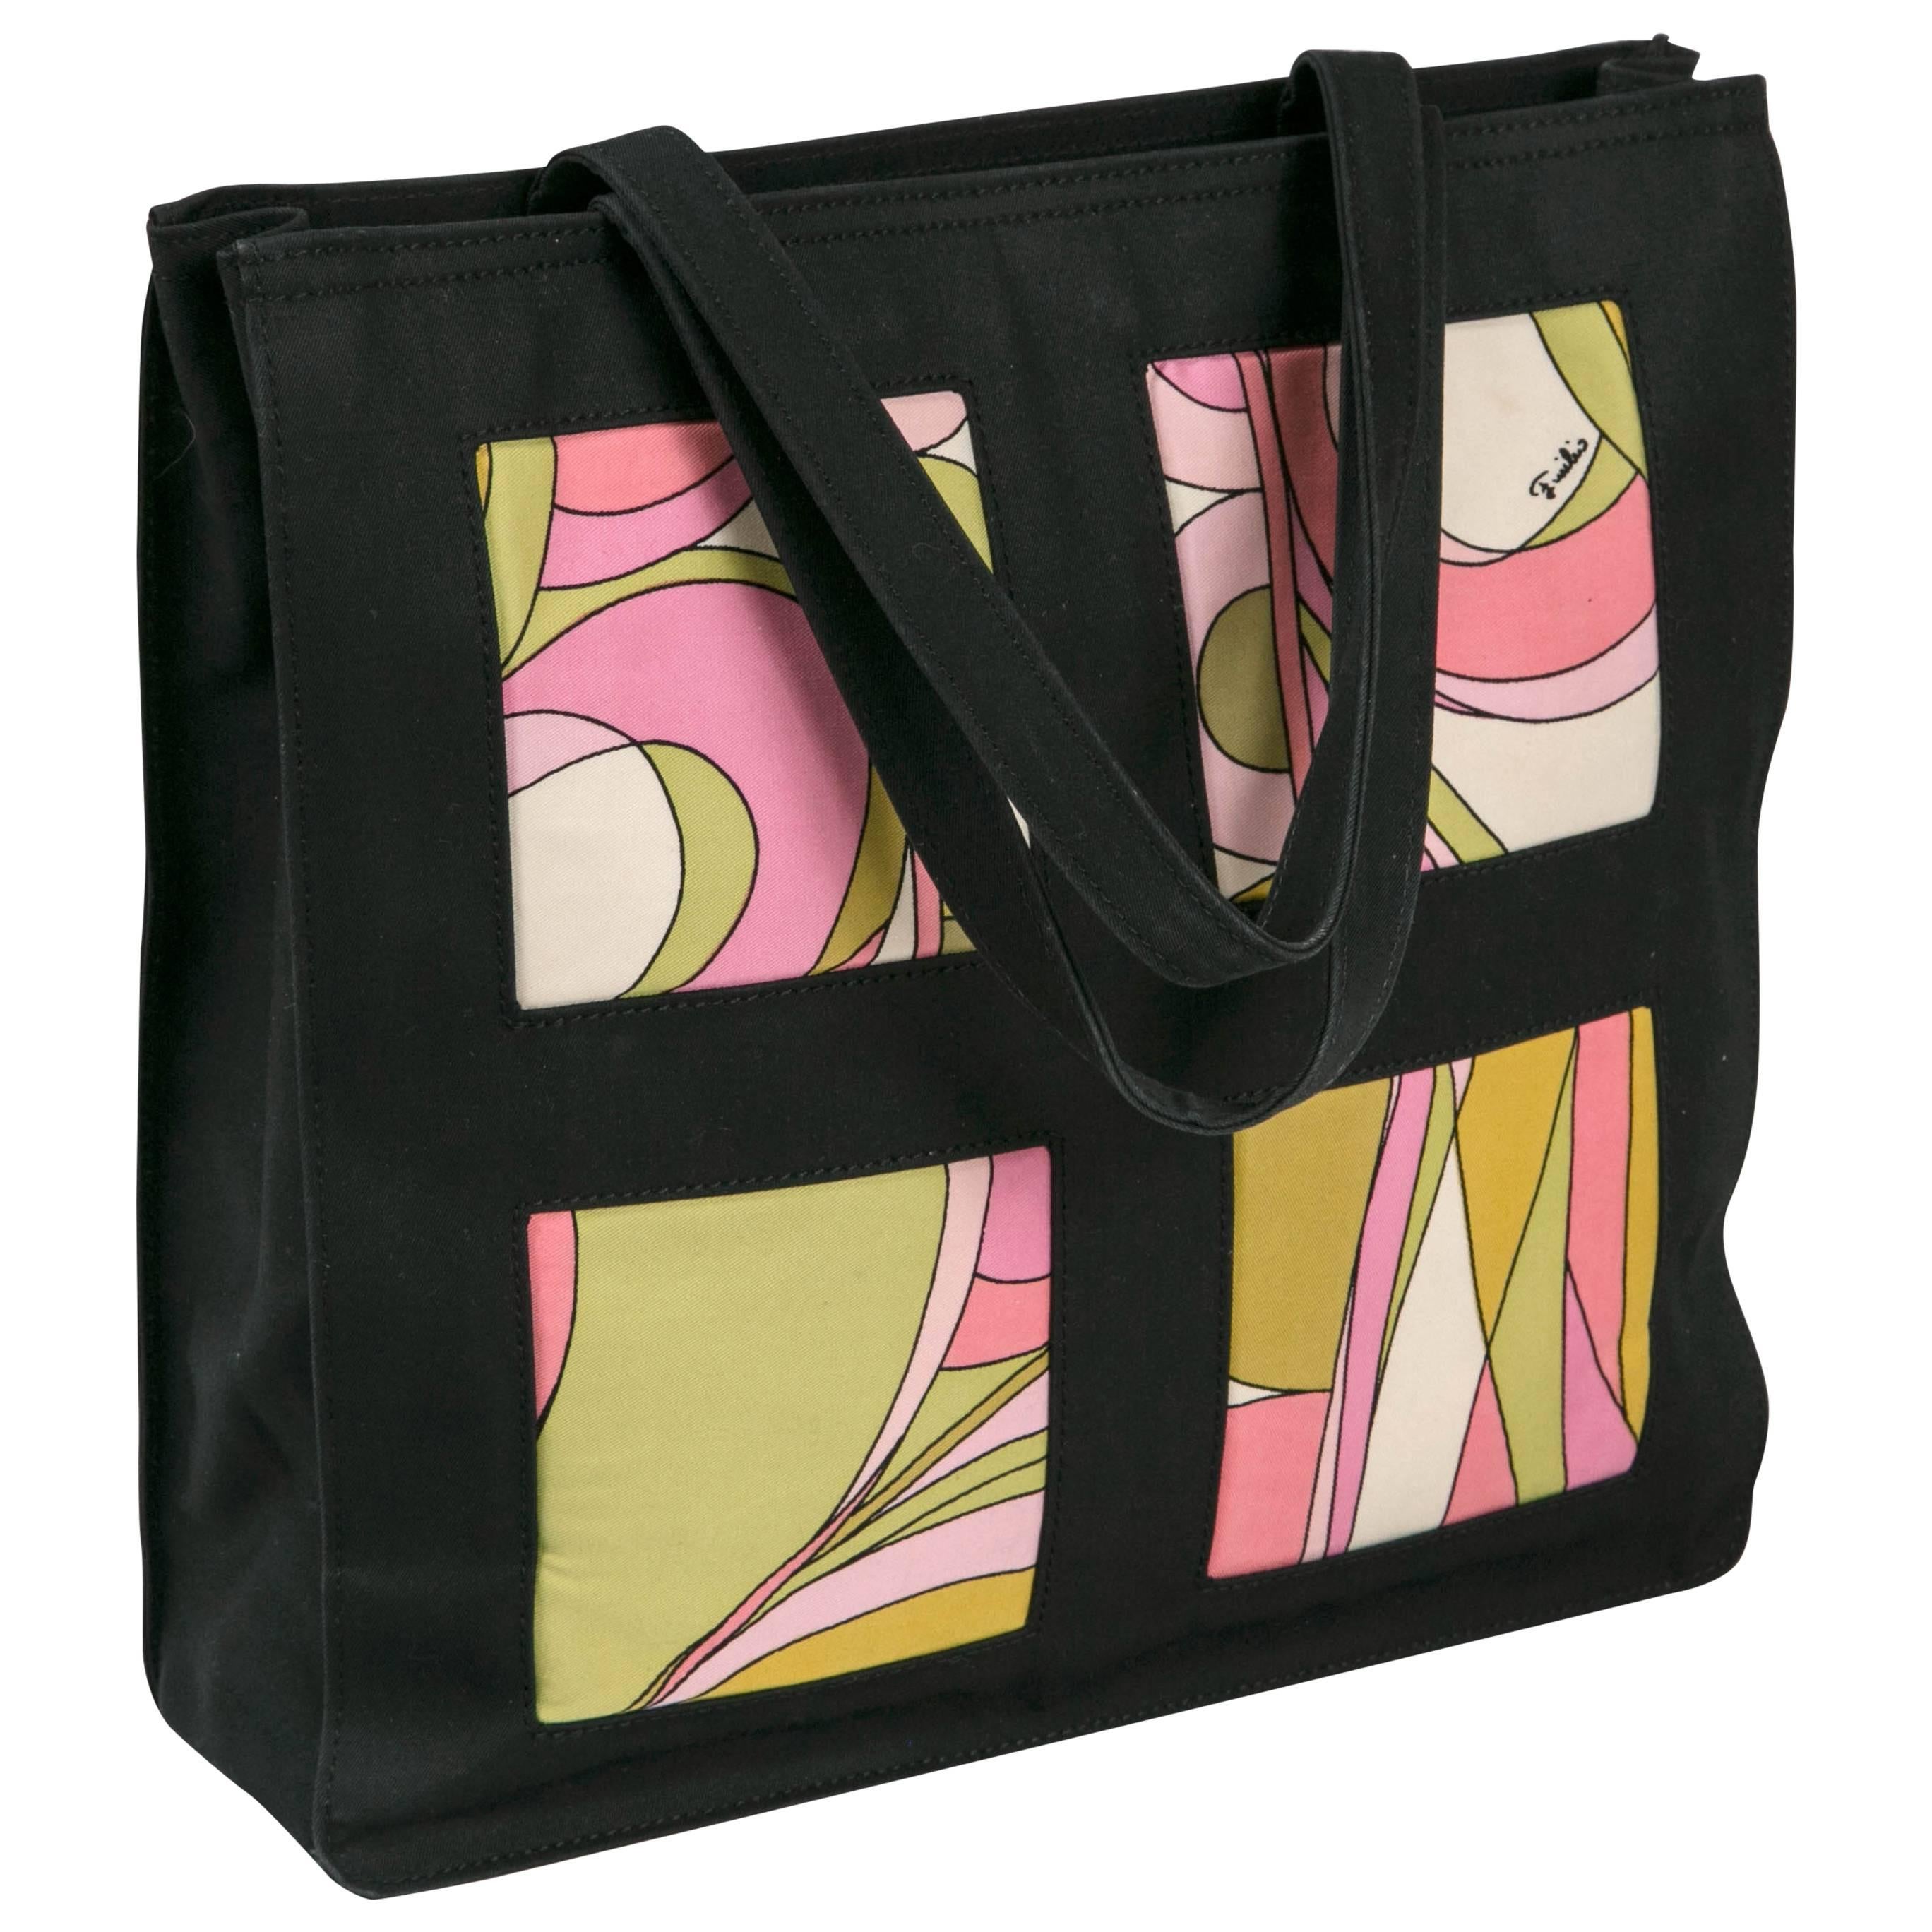 Unusual Pucci tote, purse or day bag by funky finders For Sale